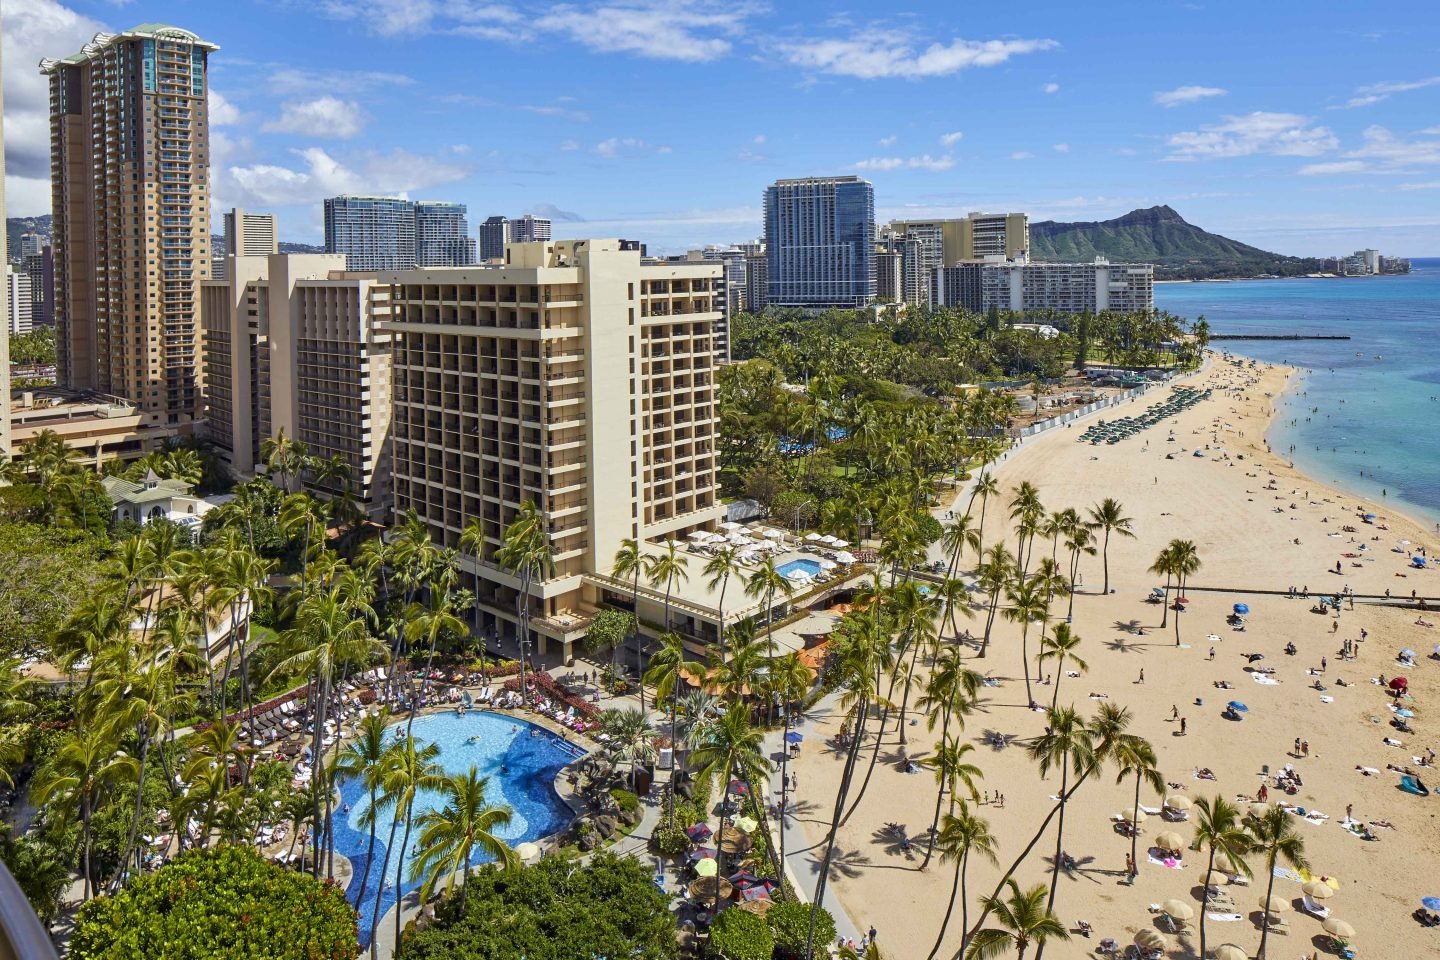 cost of trip for 4 to hawaii